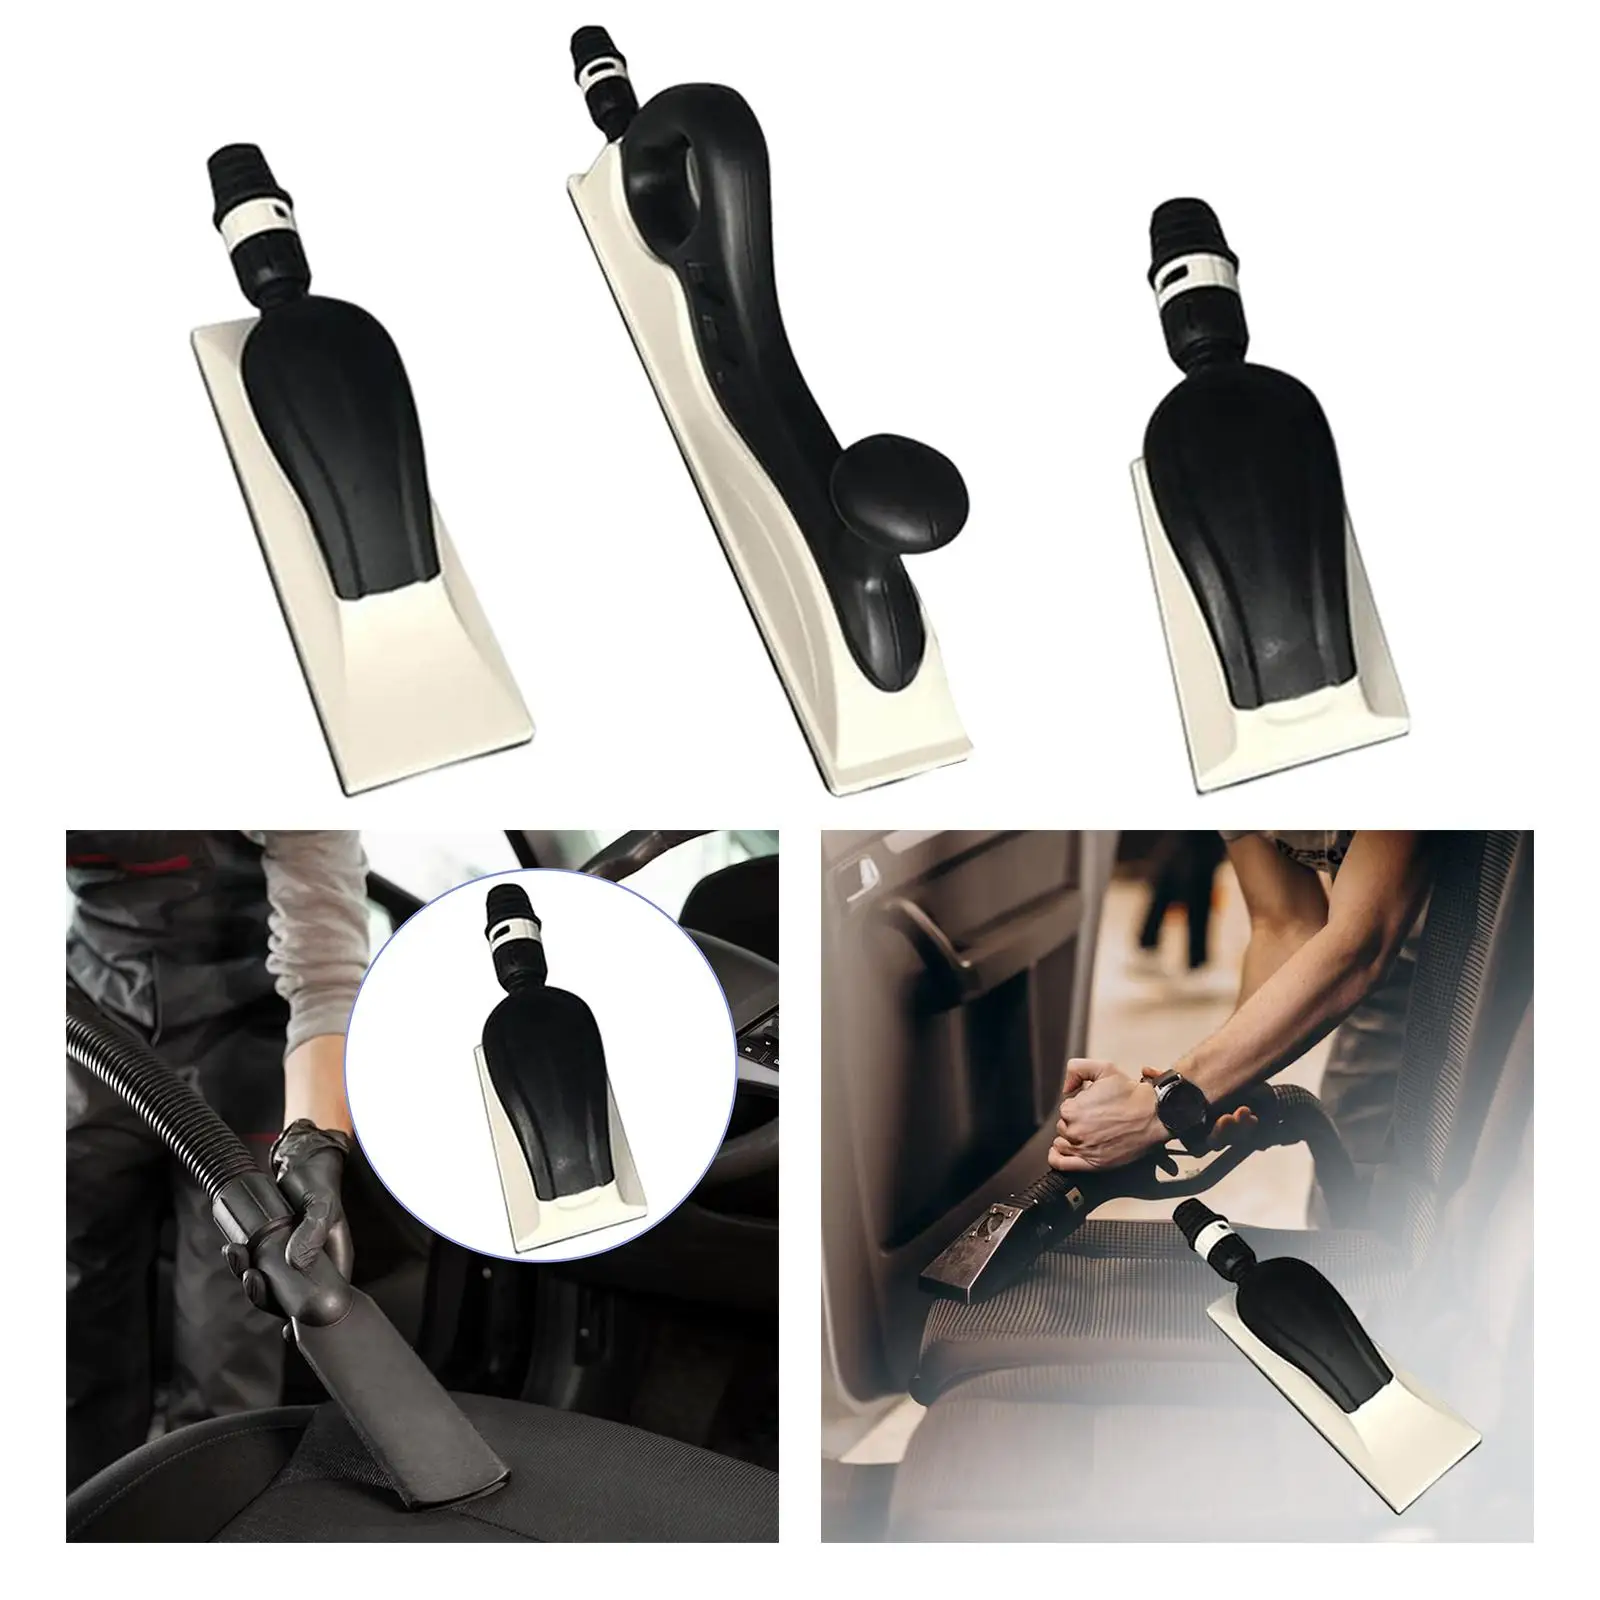 Manual Sanding Tool with Curved Adjustment Easy to Use Hand Sanding Block for Woodworking